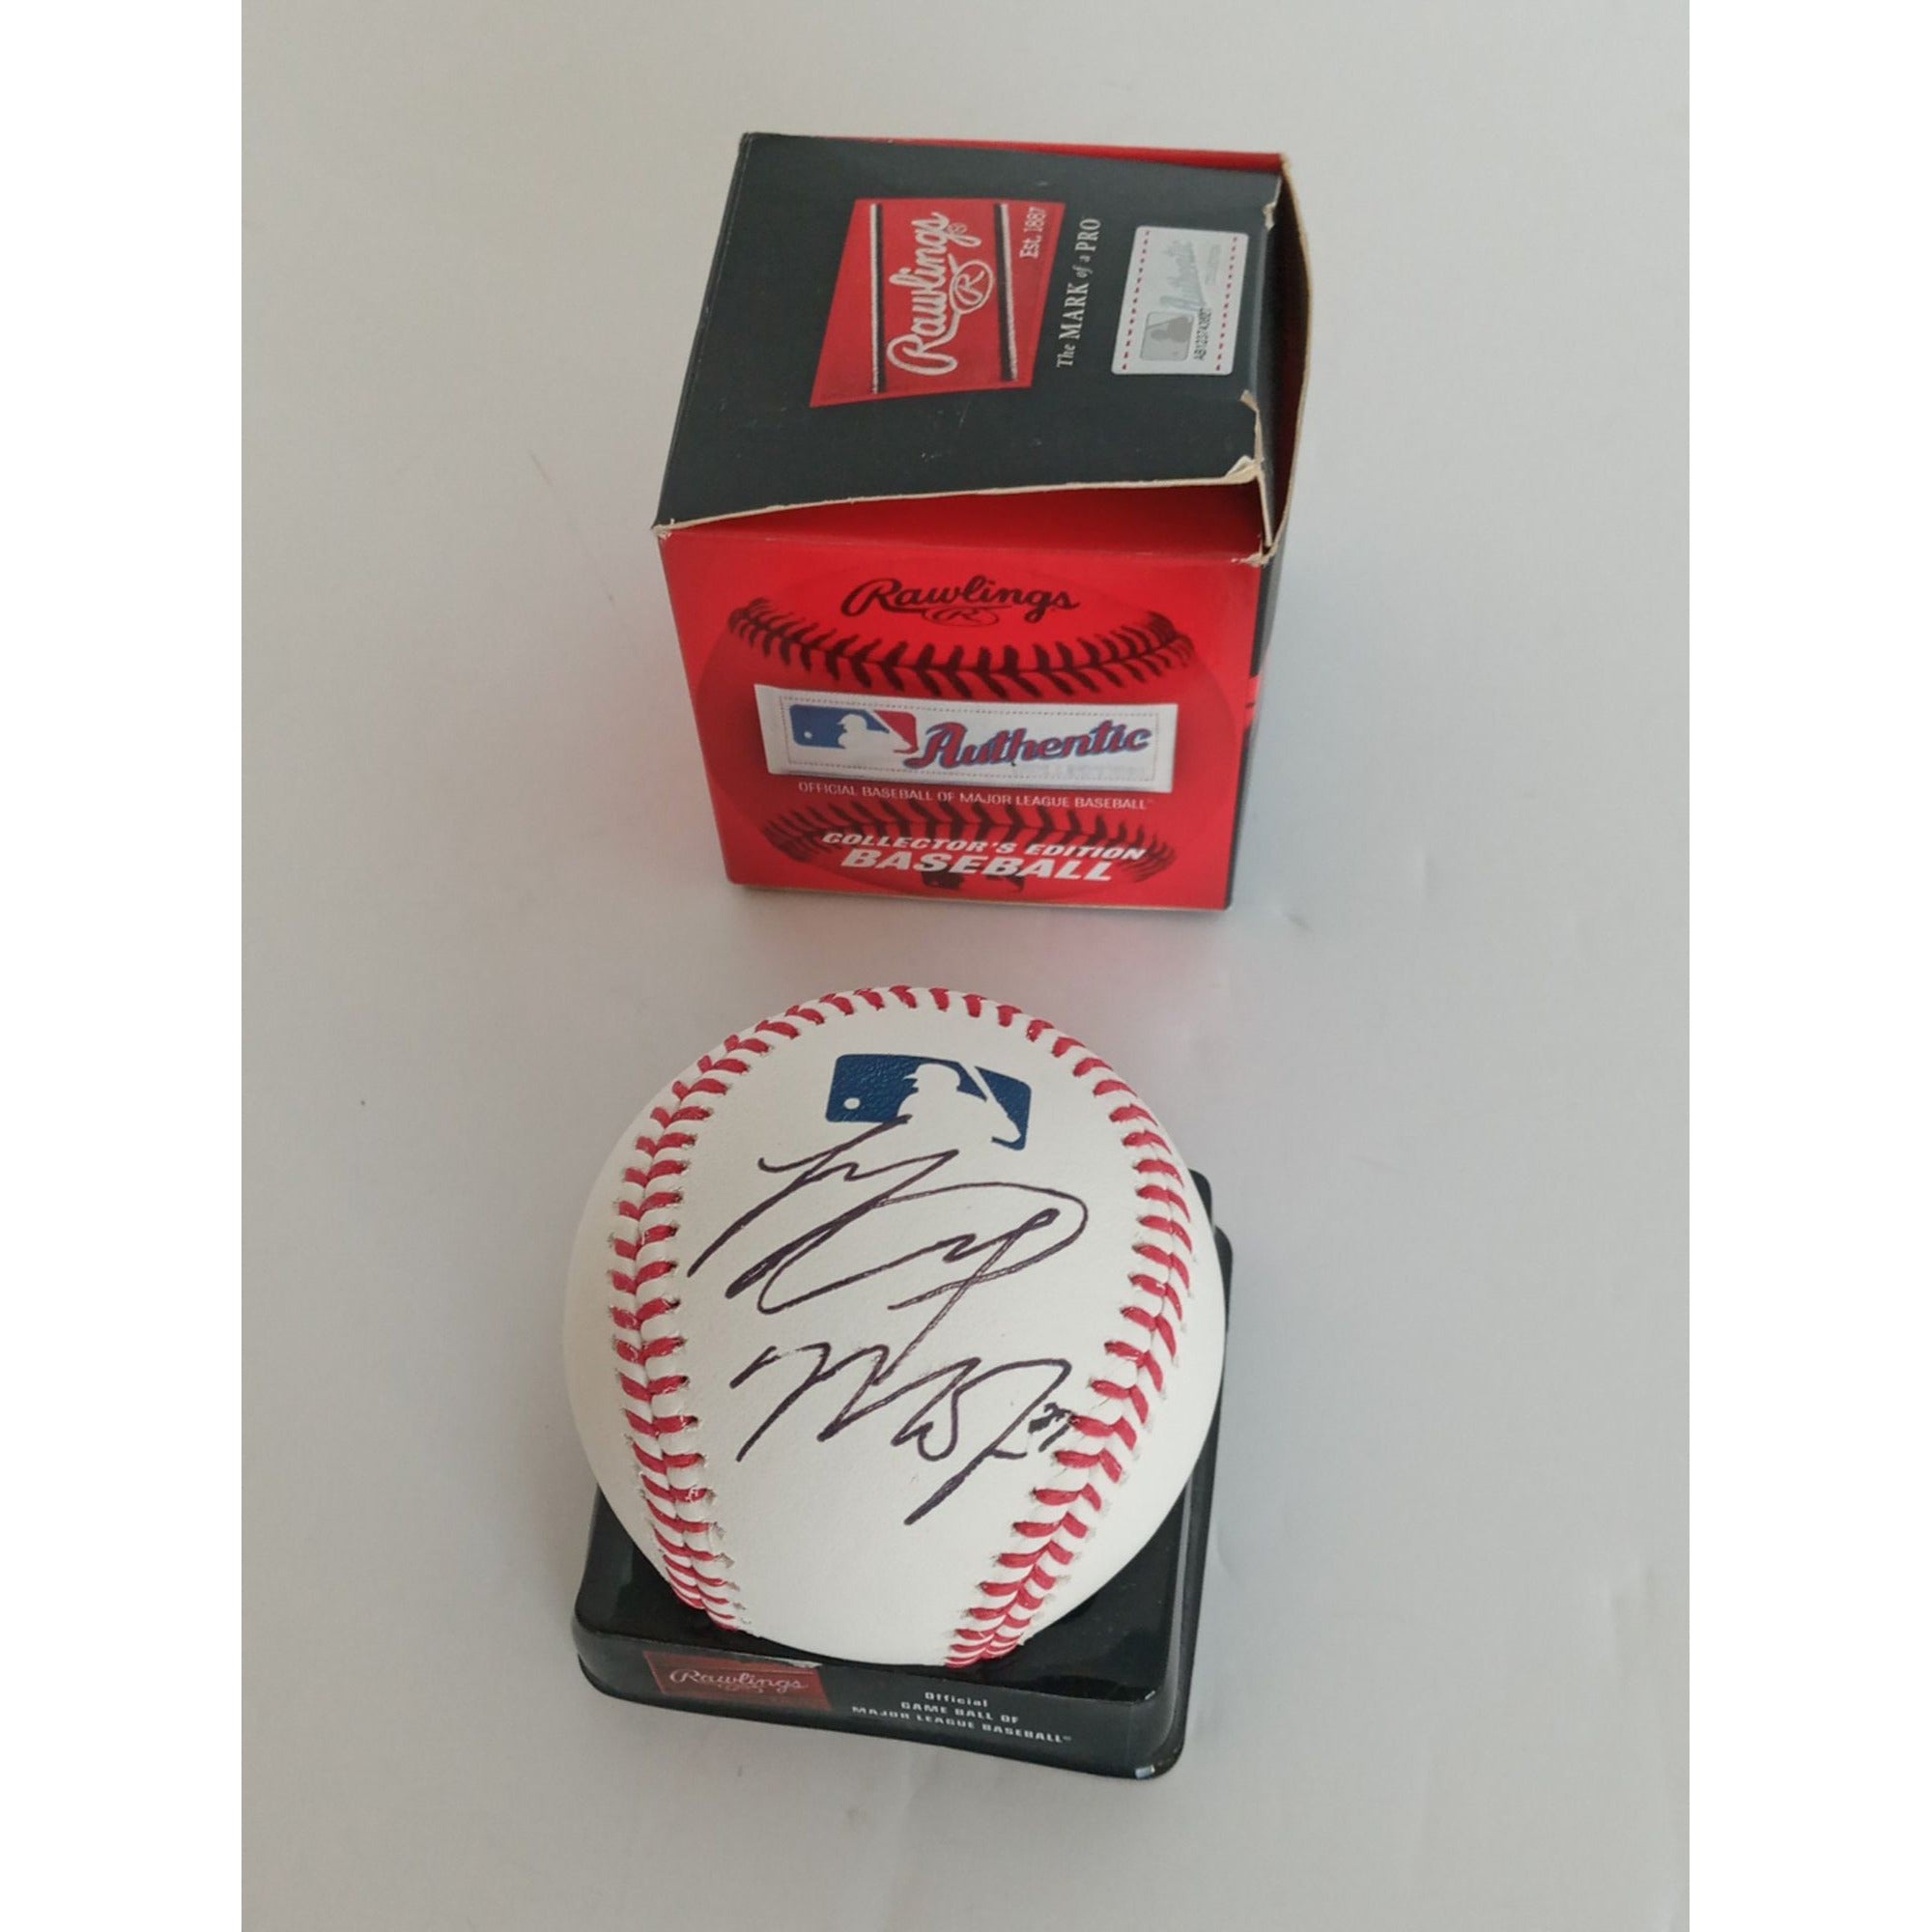 Shohei Ohtani Mike Trout MLB baseball signed with proof